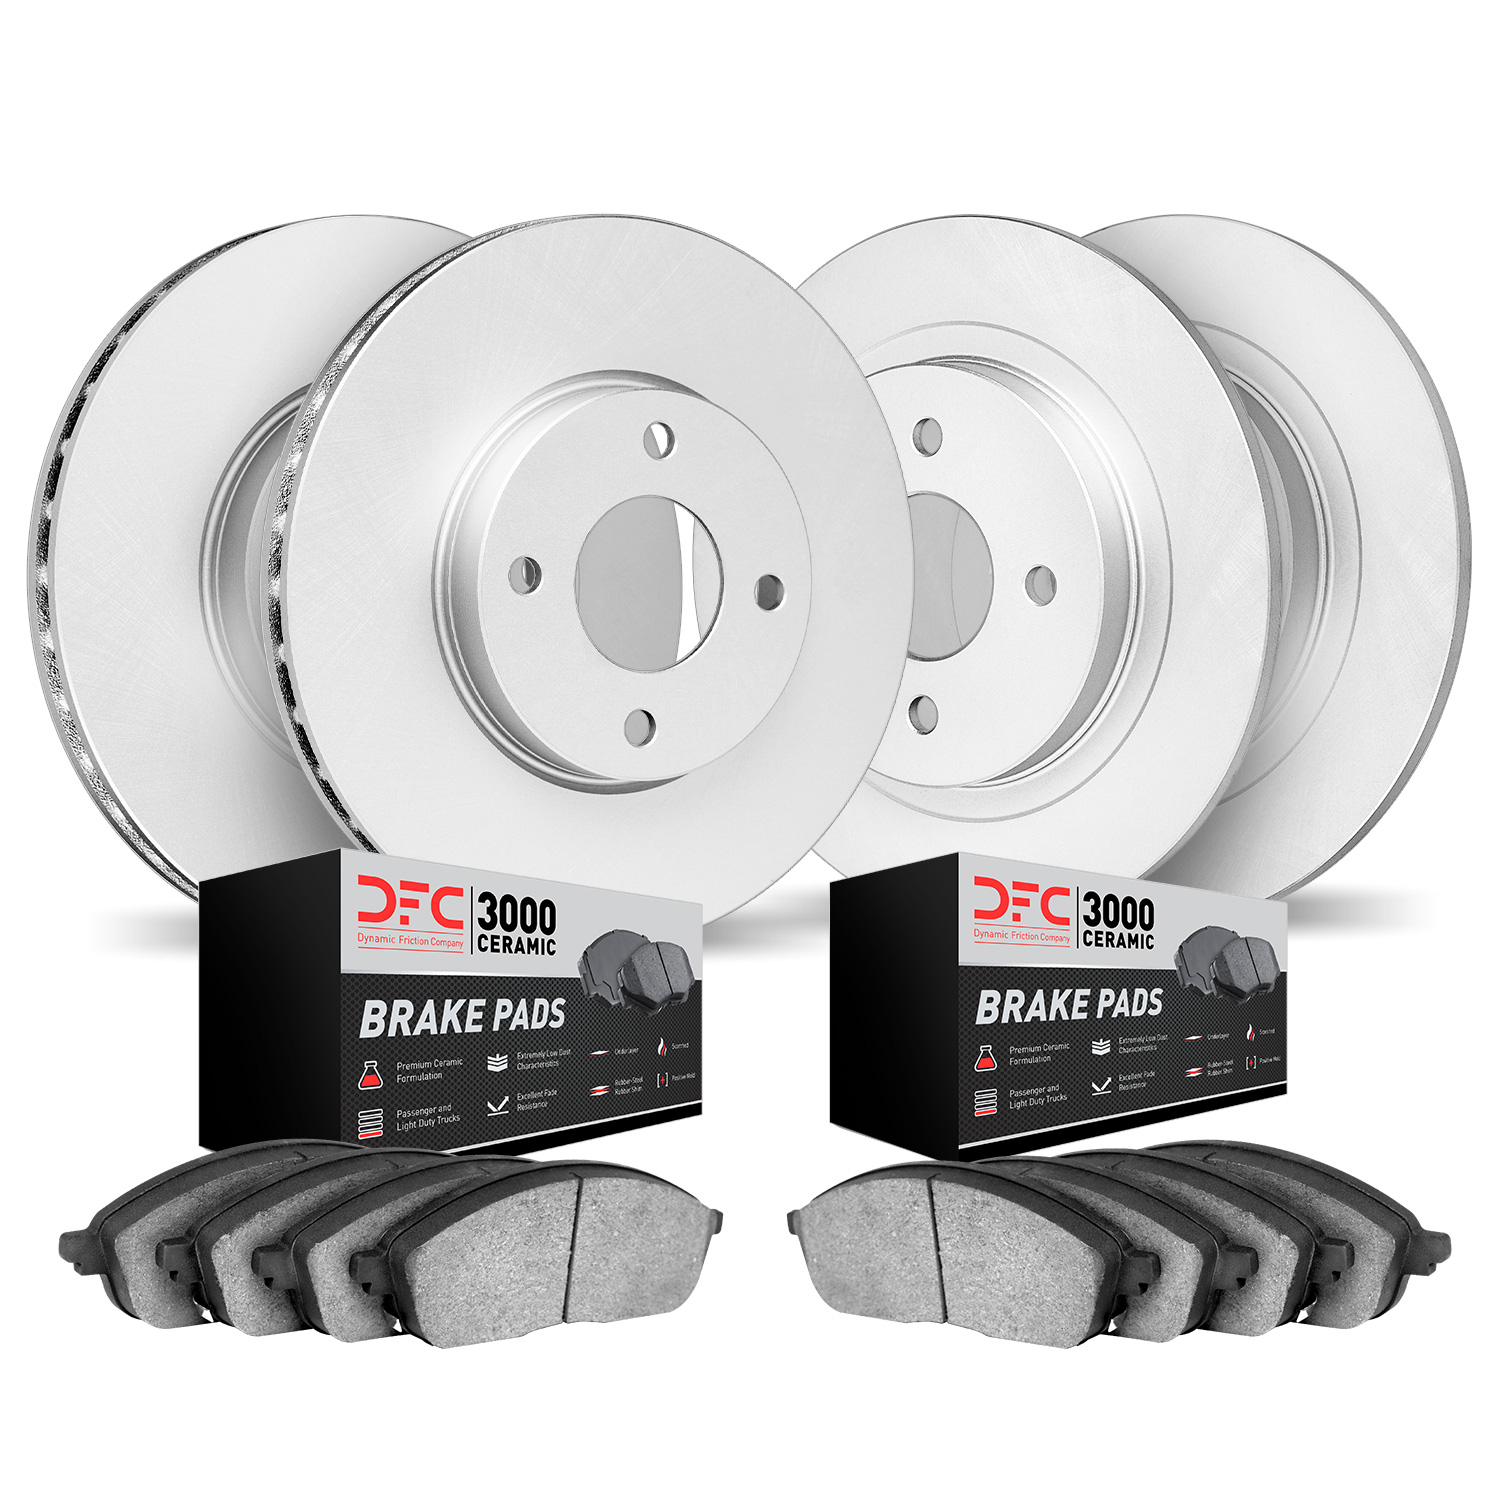 4304-67008 Geospec Brake Rotors with 3000-Series Ceramic Brake Pads Kit, 1991-1996 Infiniti/Nissan, Position: Front and Rear